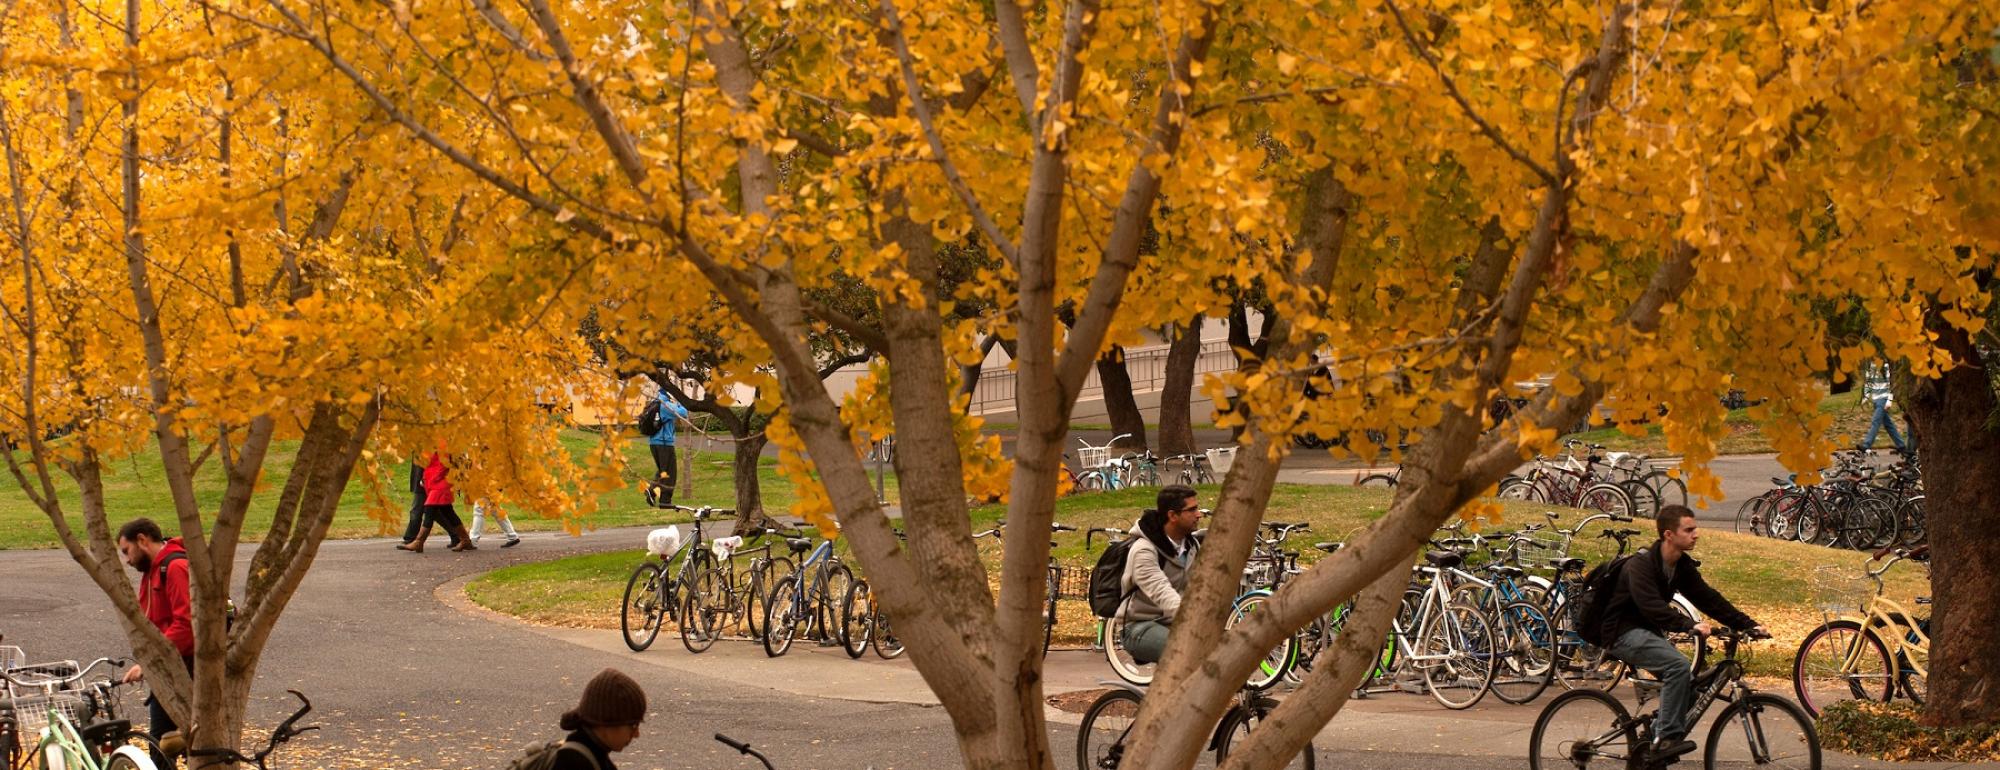 trees with fall yellow leaves and students on bikes